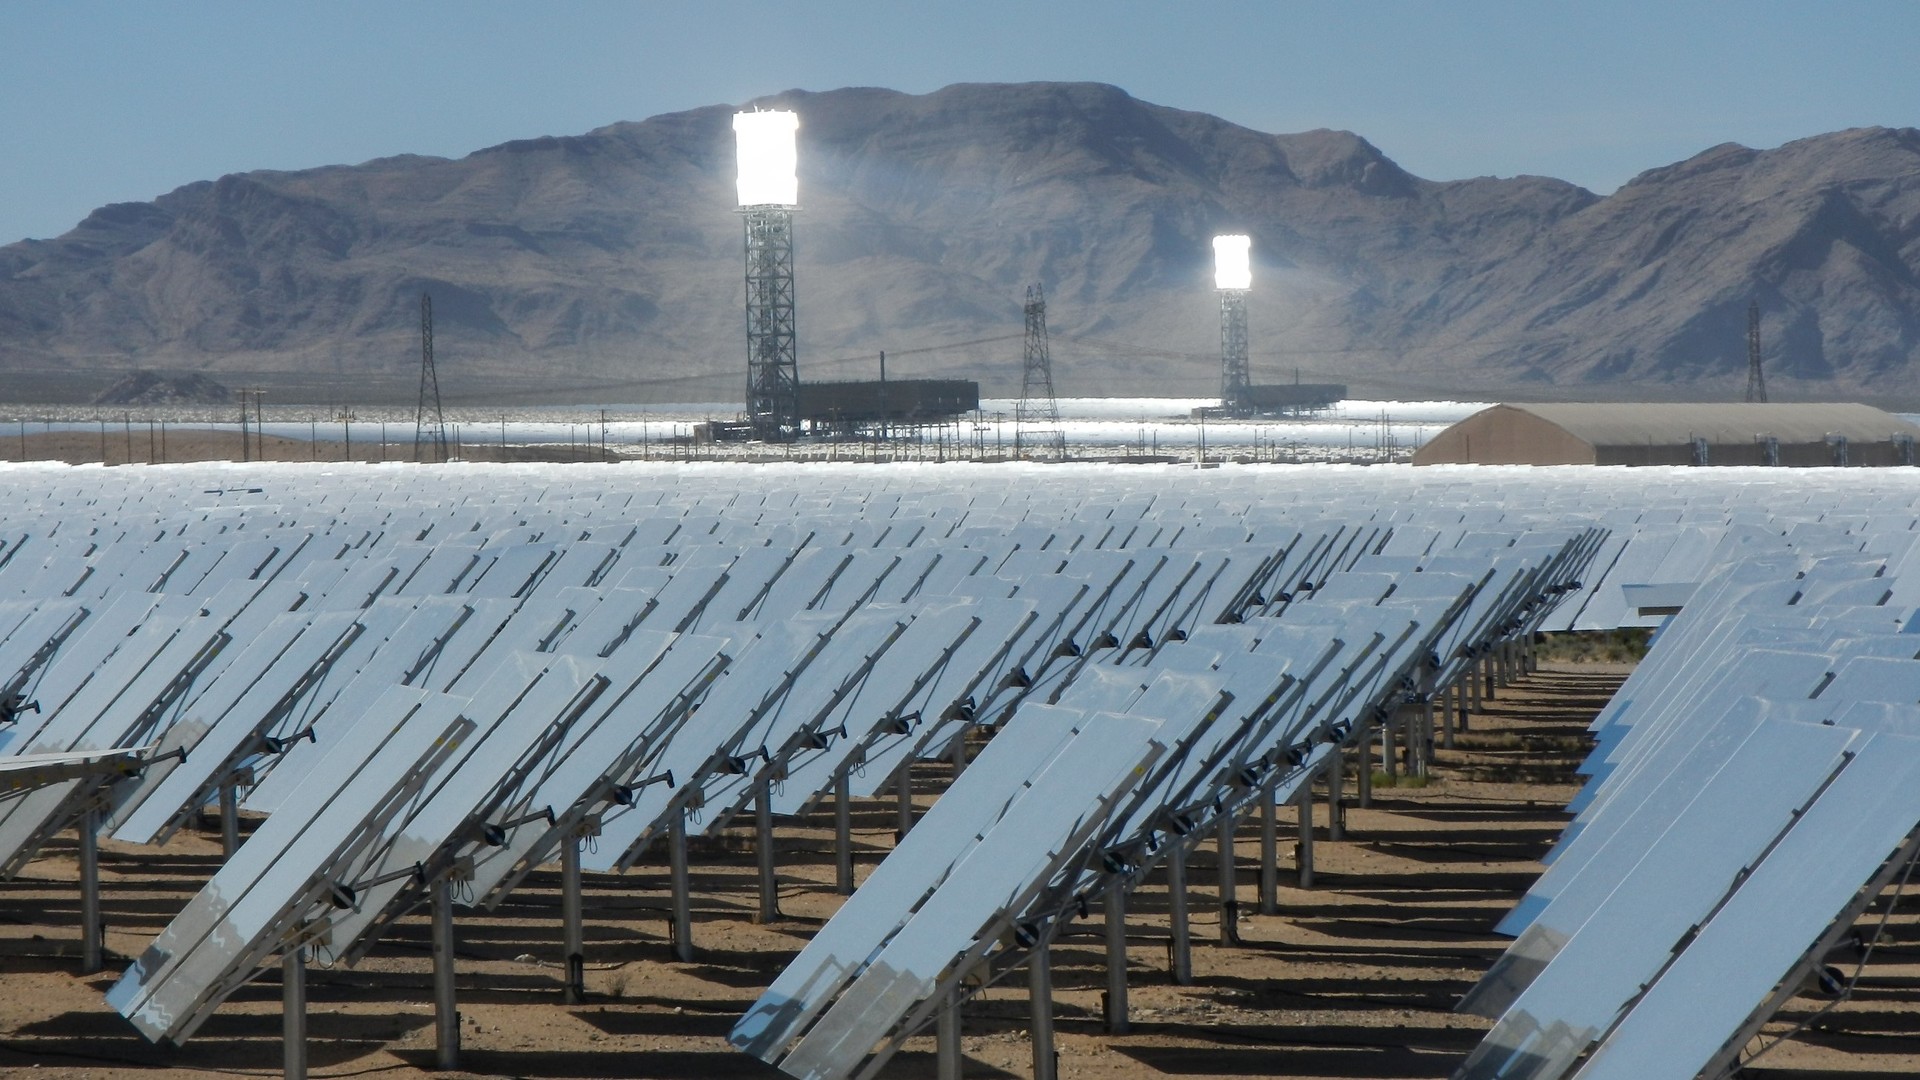 The Ivanpah Solar Electric Generating system, a field of mirrors with large towers in the background.